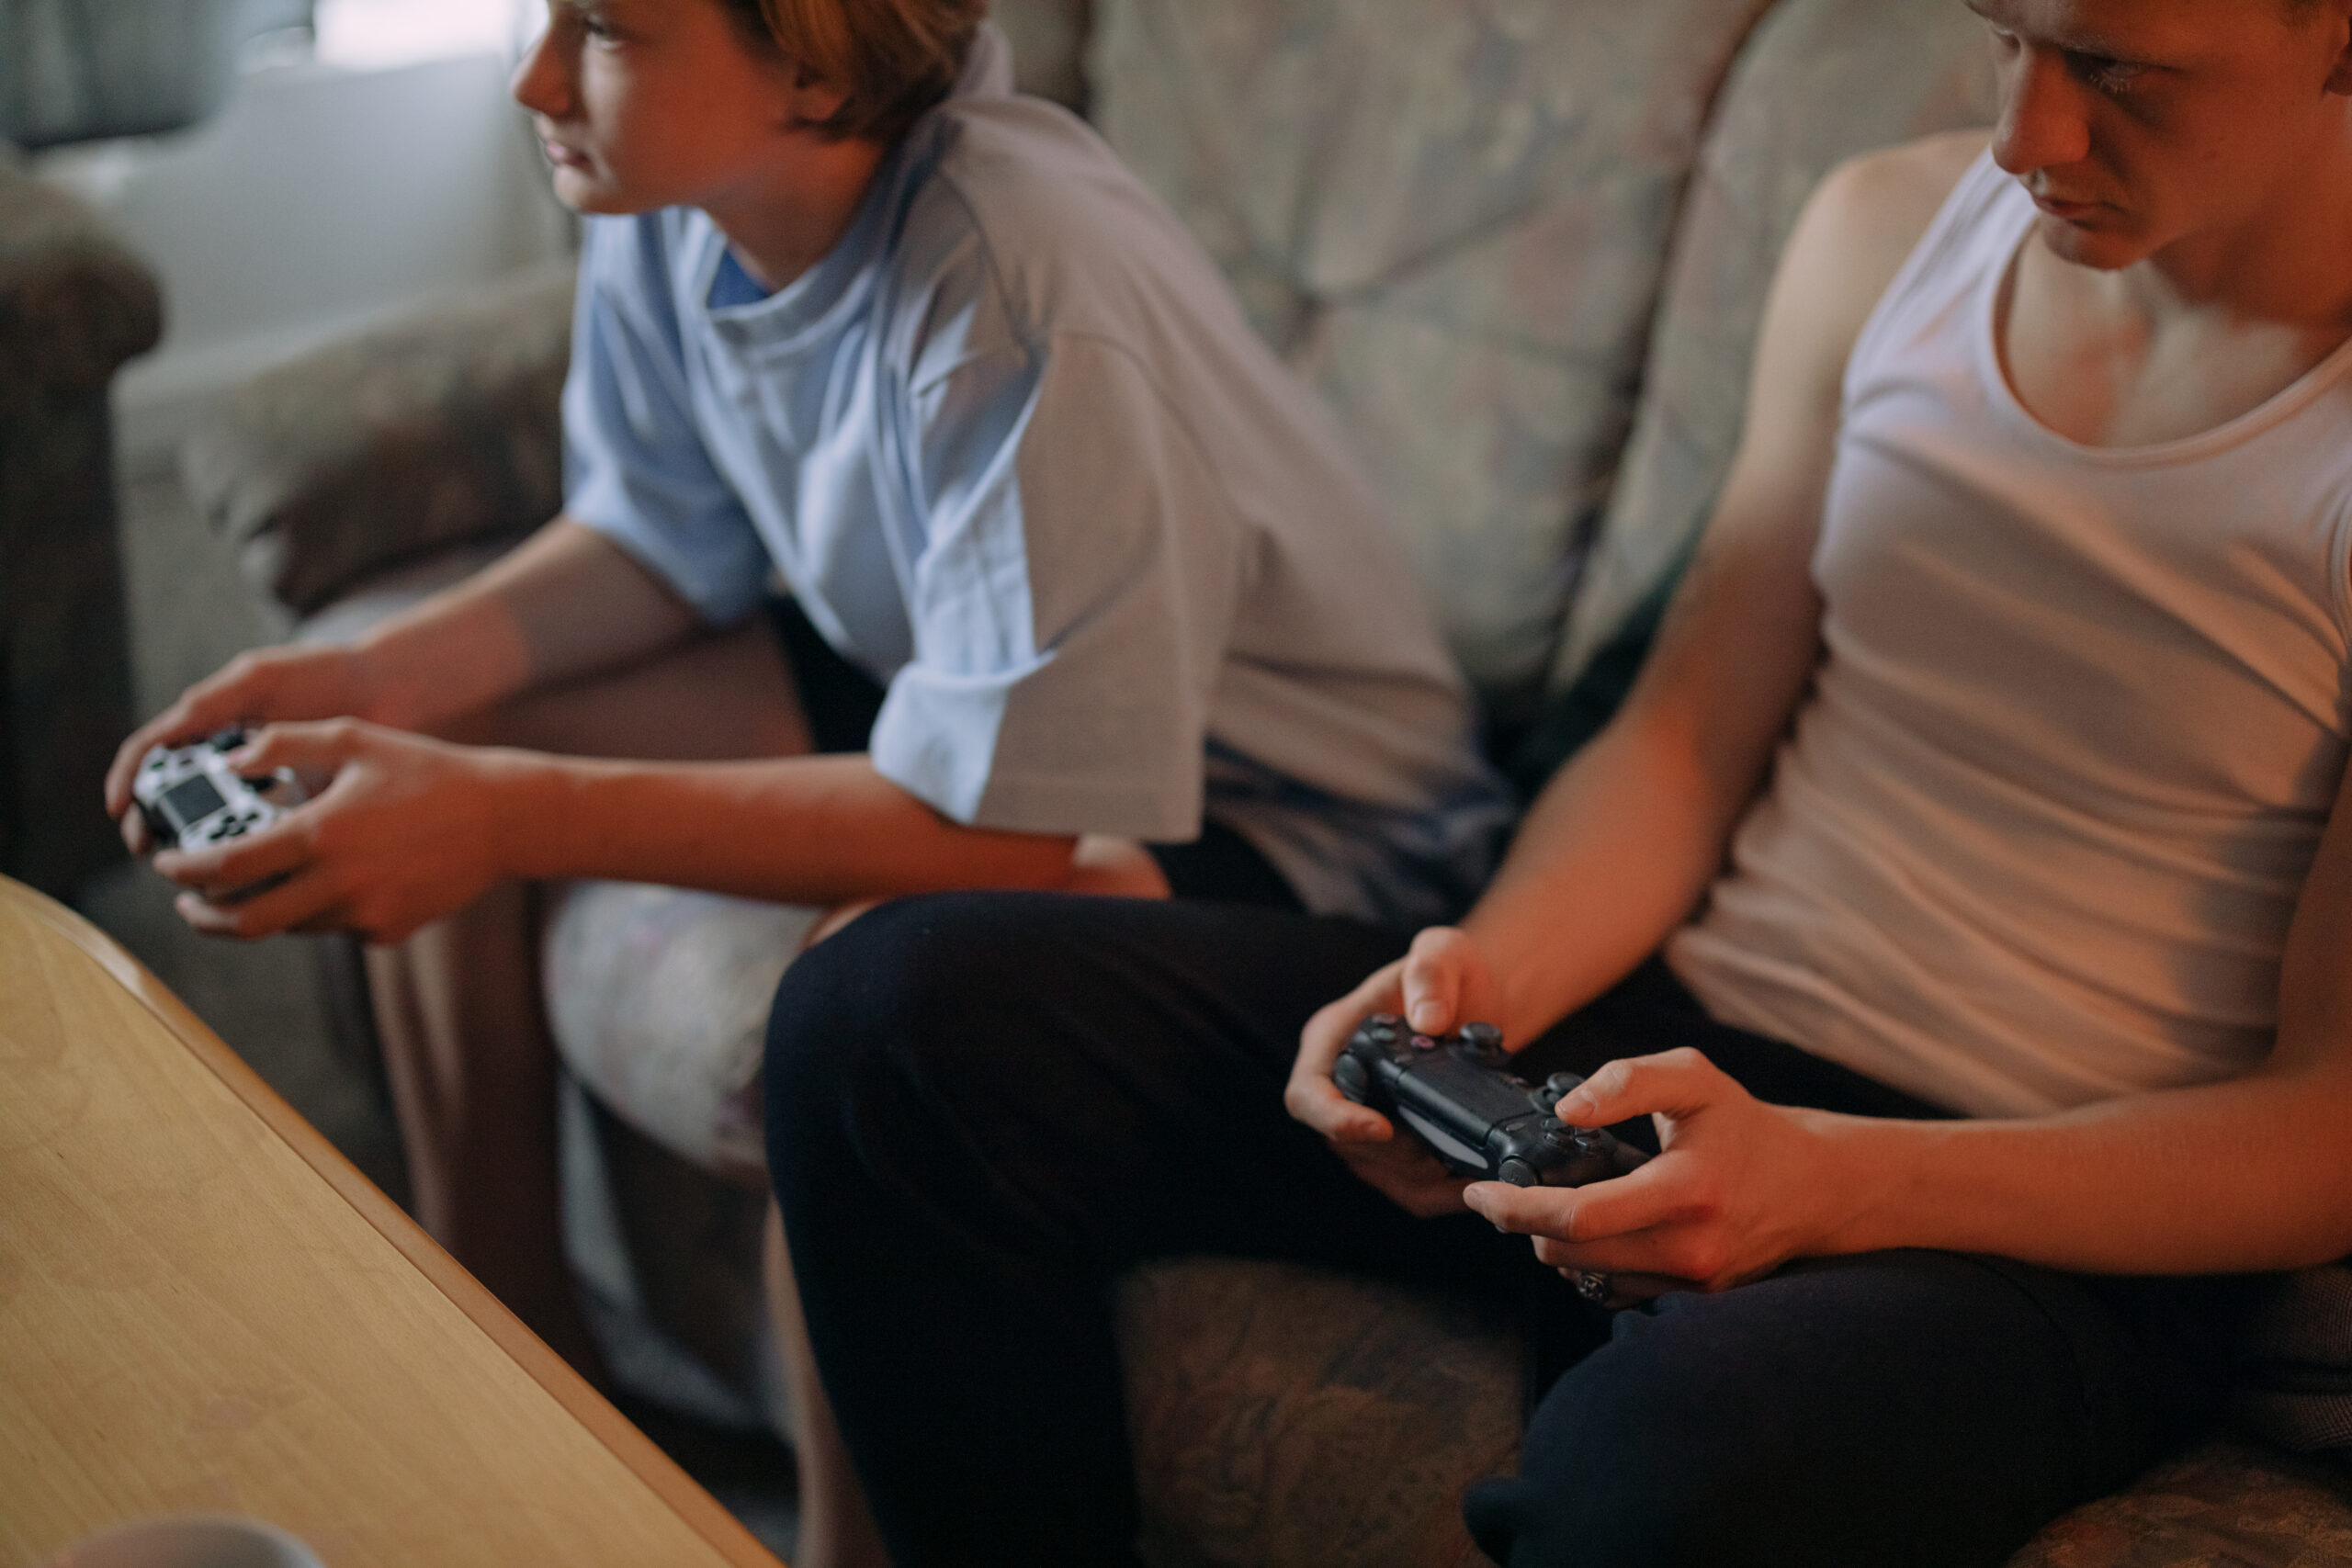 Two young people sitting on a couch, each holding a video game controller, focused intently on playing one of the best sports video games.